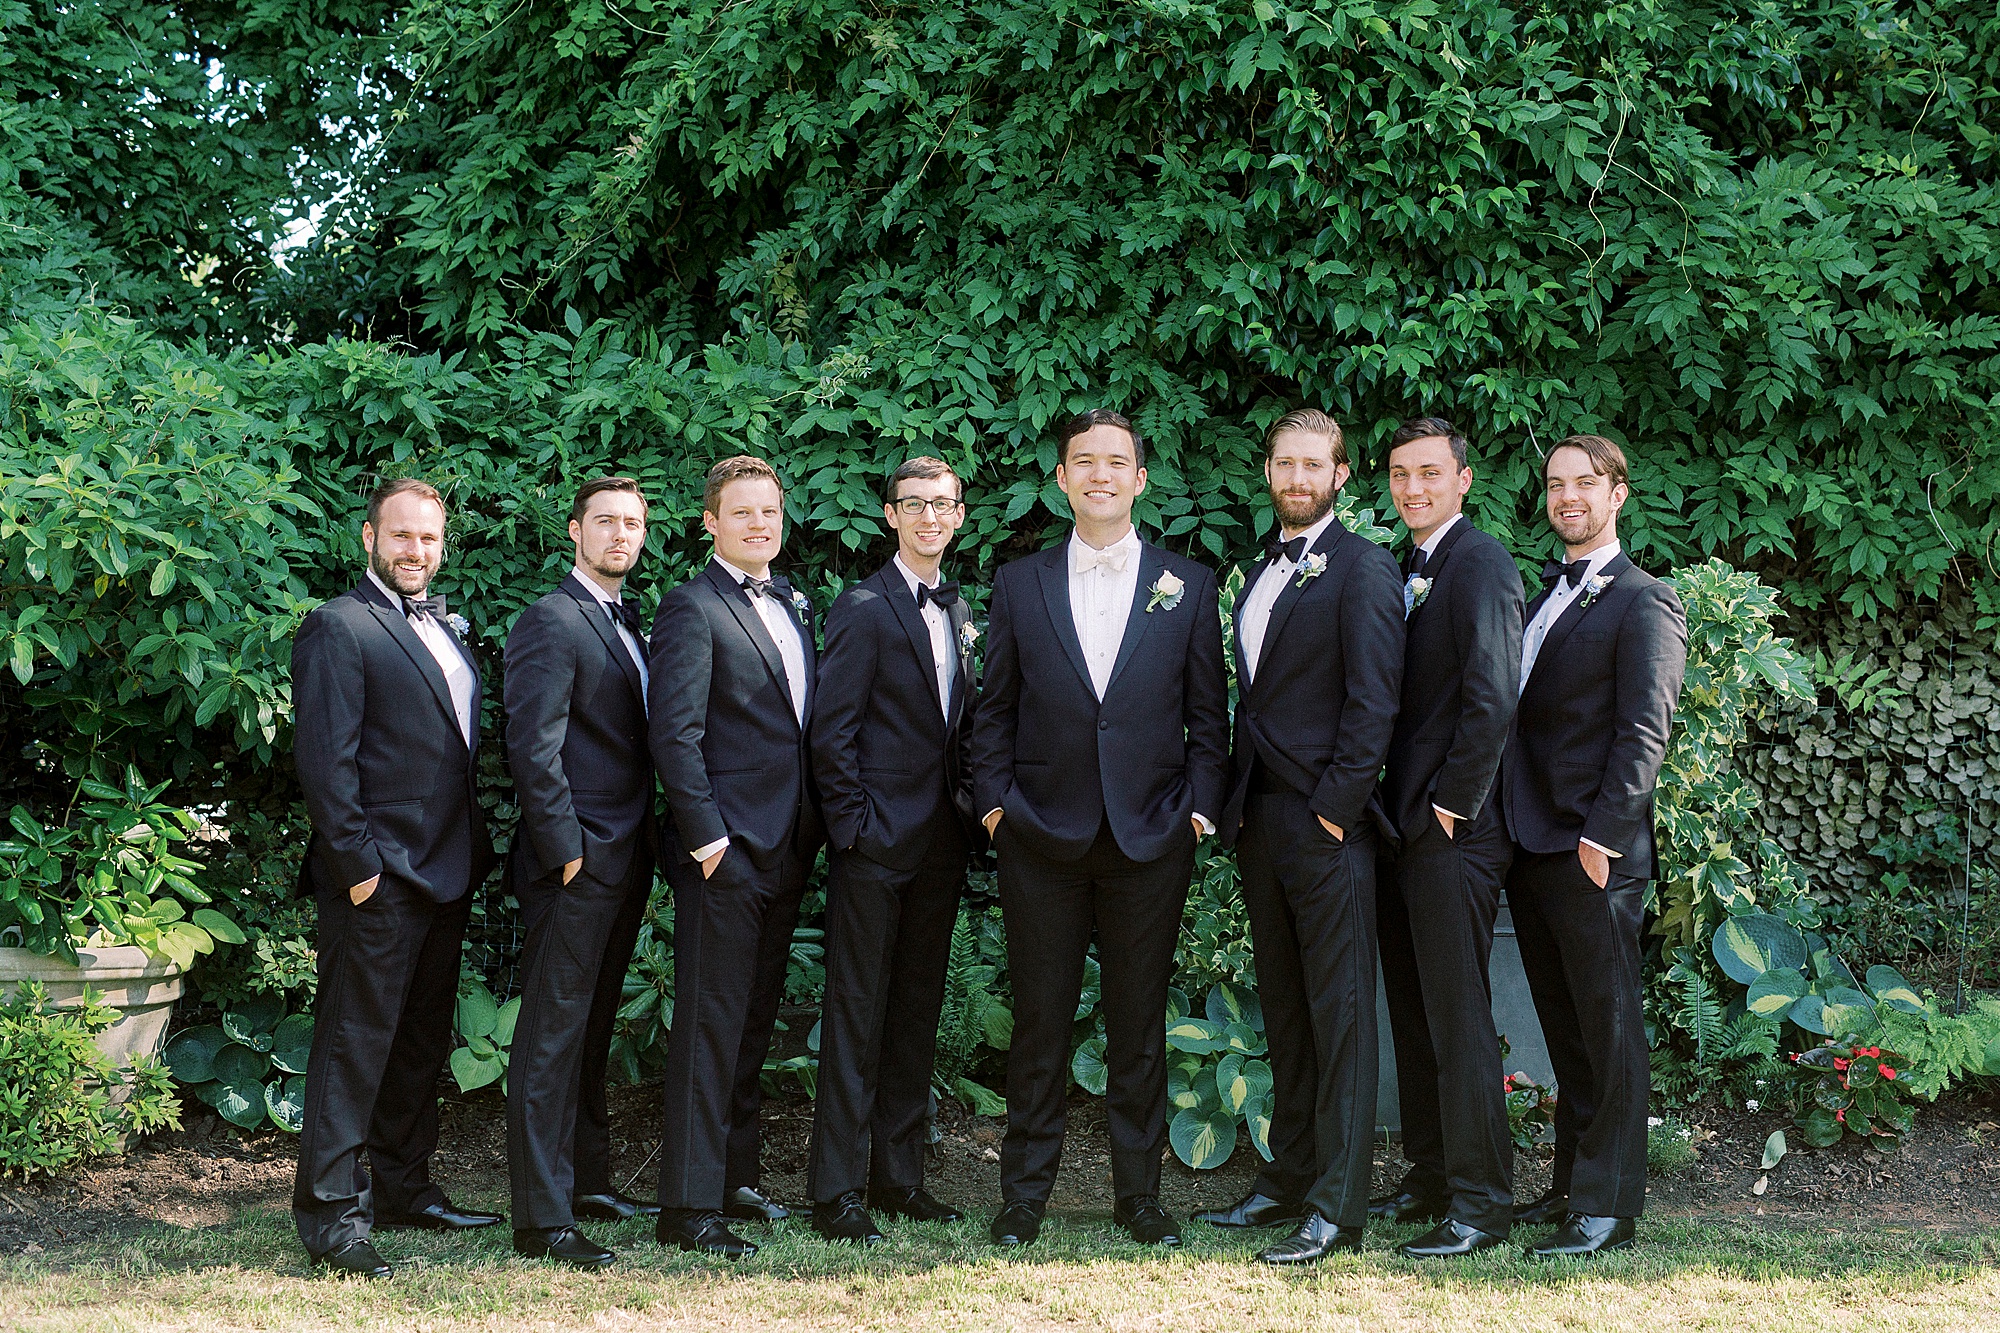 groom and groomsmen pose in classic tuxes